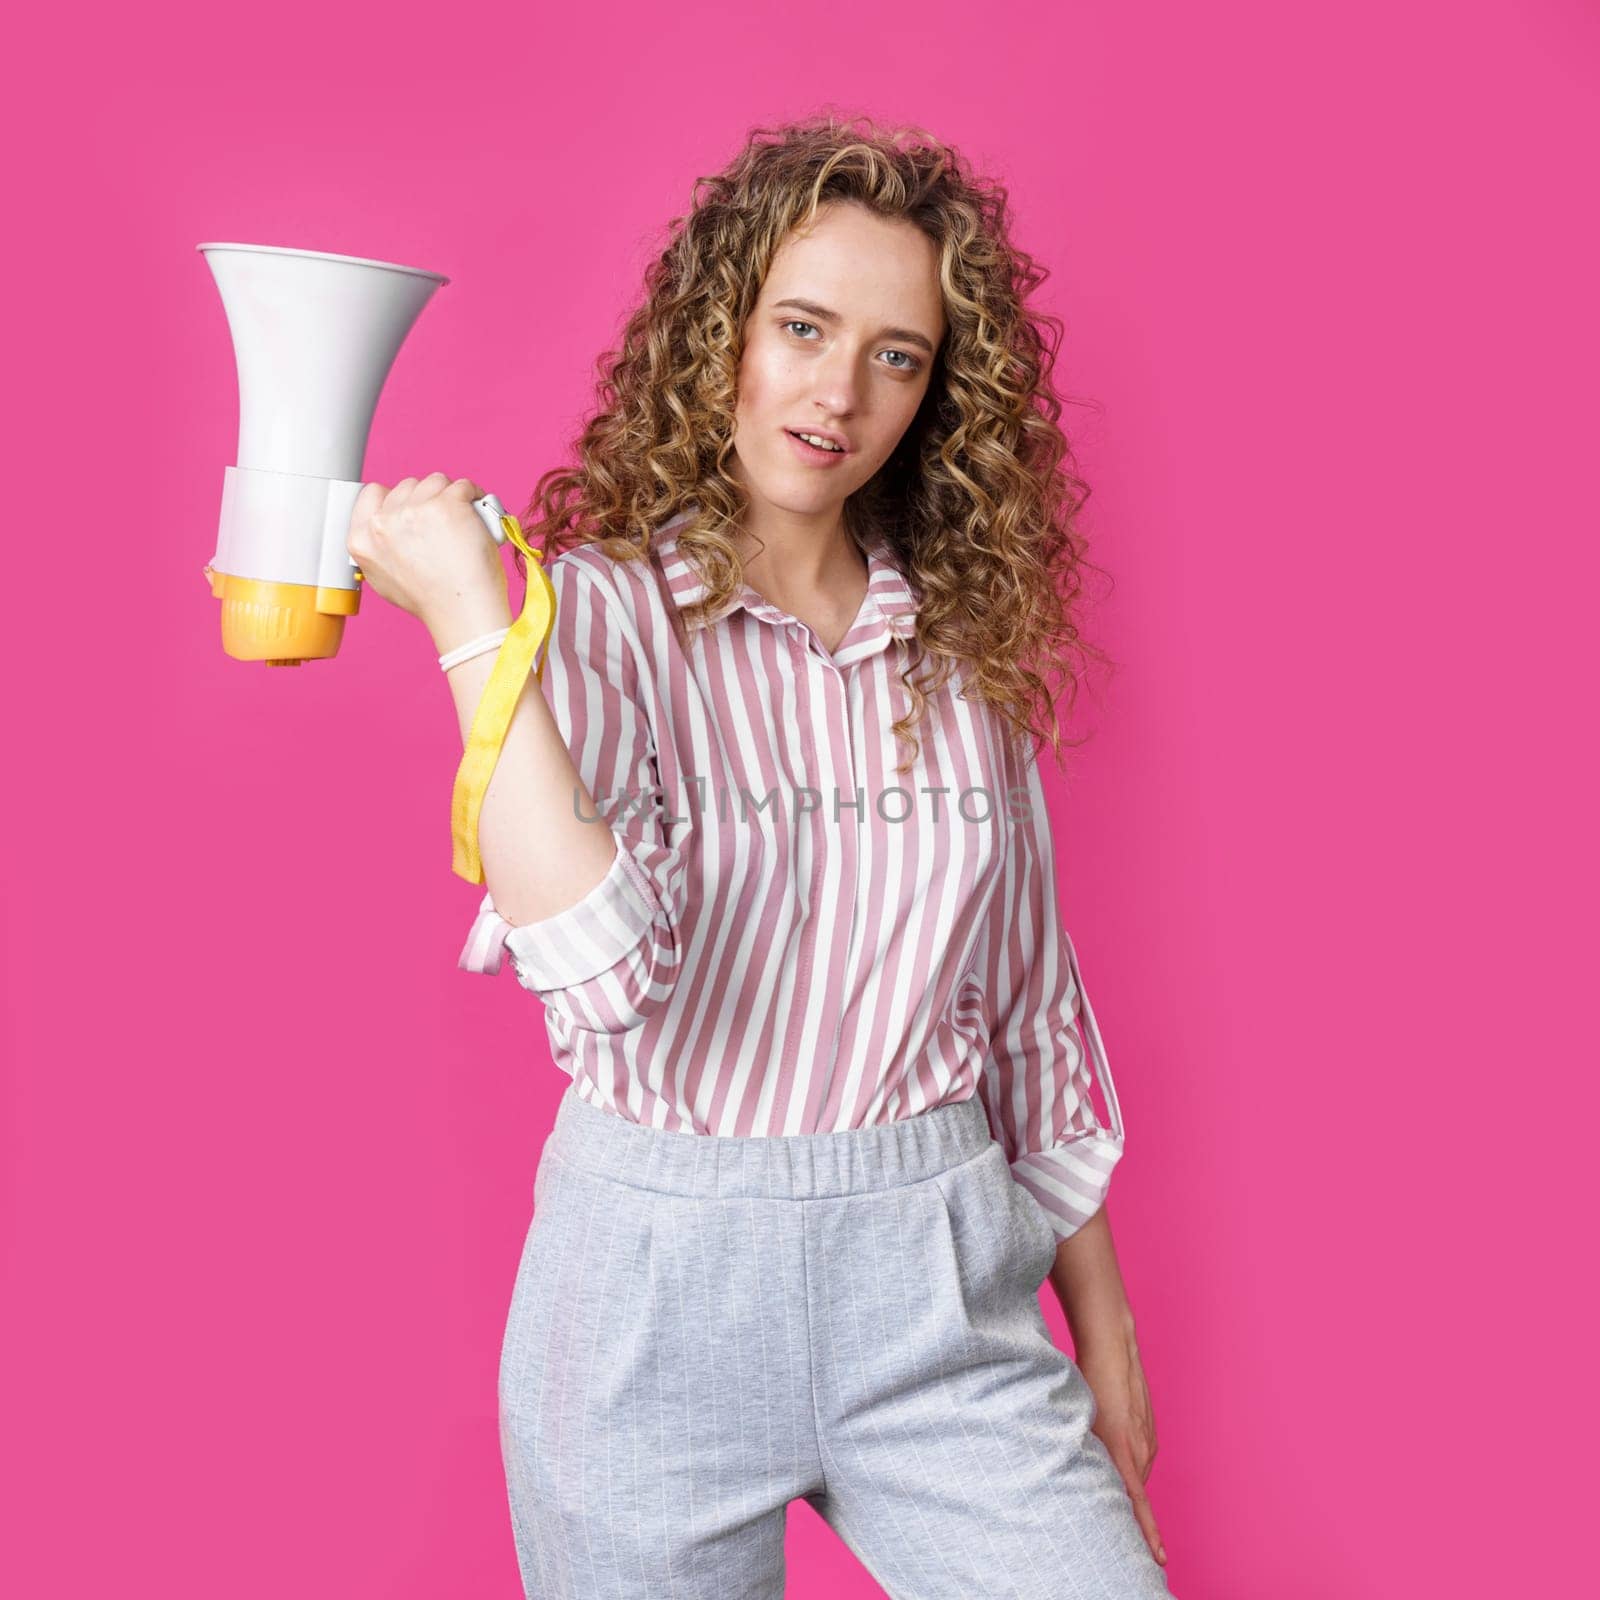 A young woman holds a megaphone in her hands and looks at the camera. Isolated pink background. by Sd28DimoN_1976